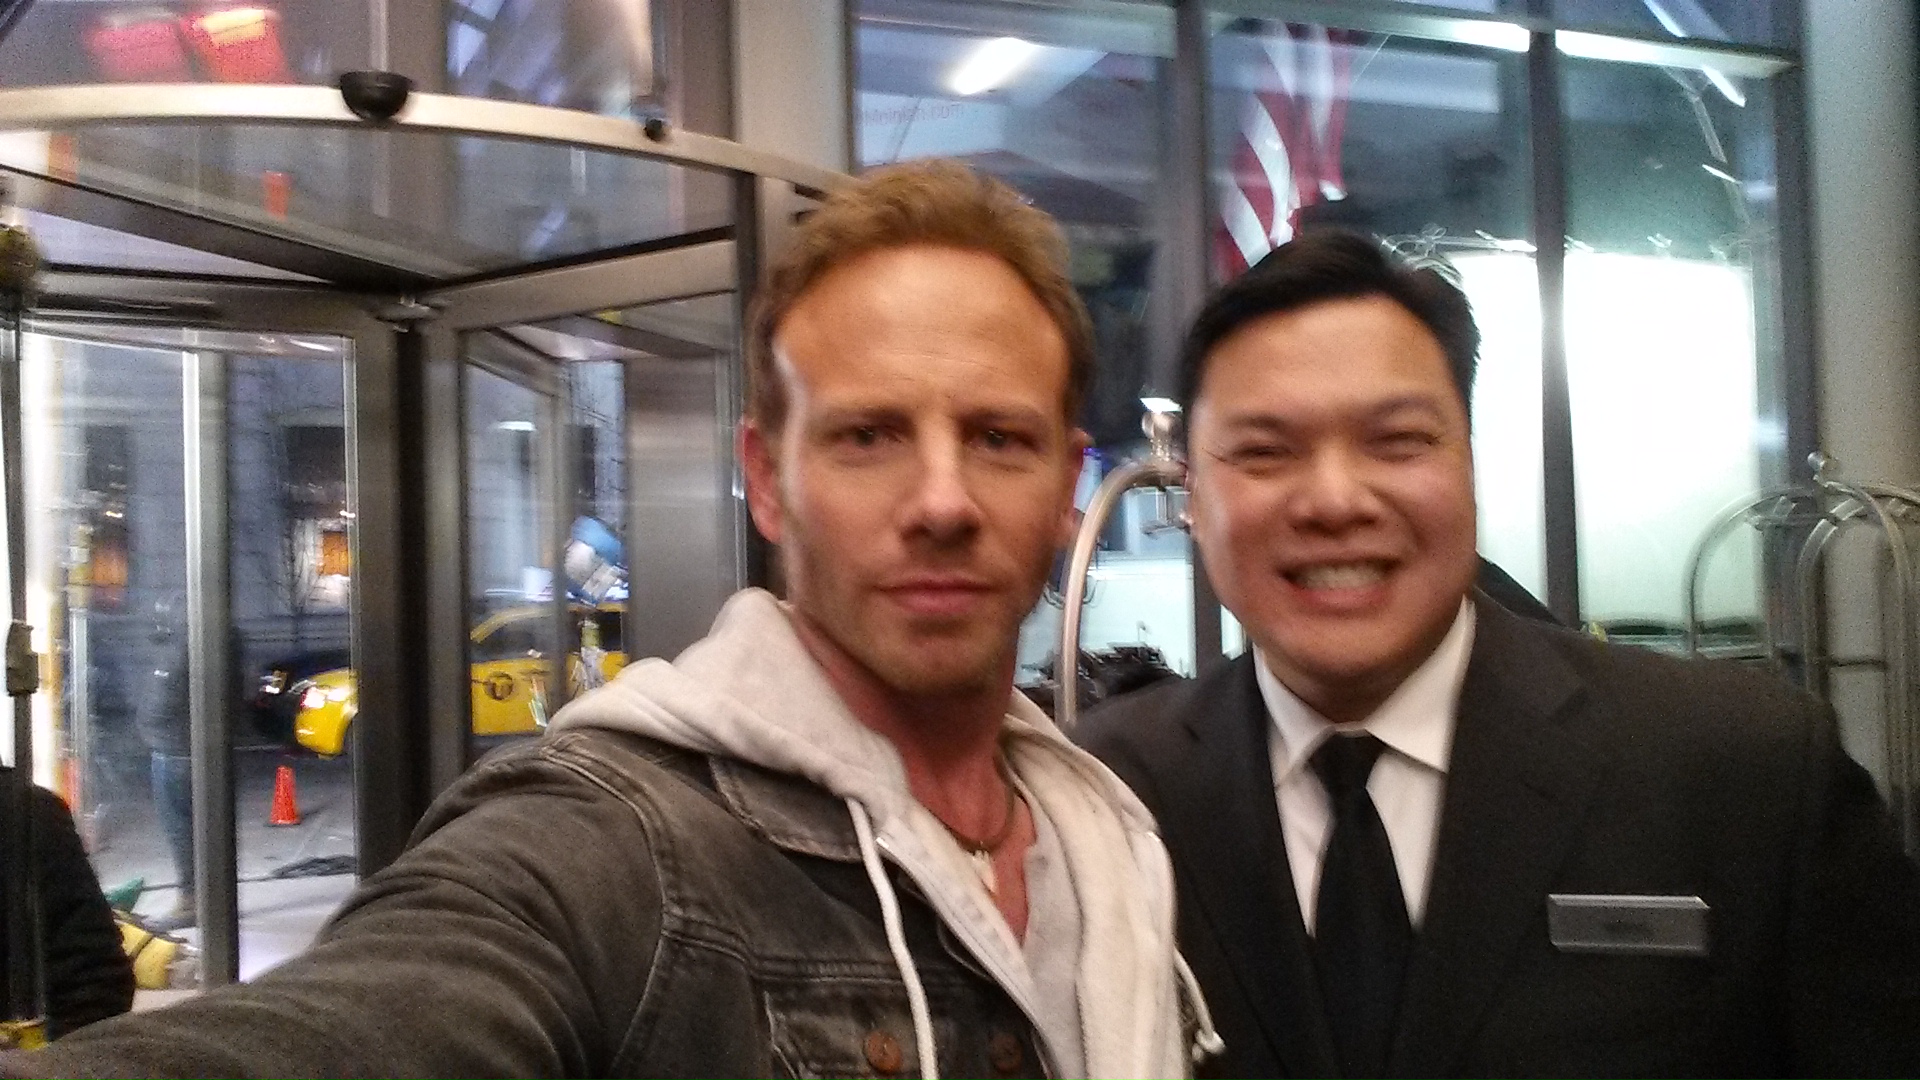 Ian Ziering and Lyman Chen on the set of Sharknado 2:The Second One